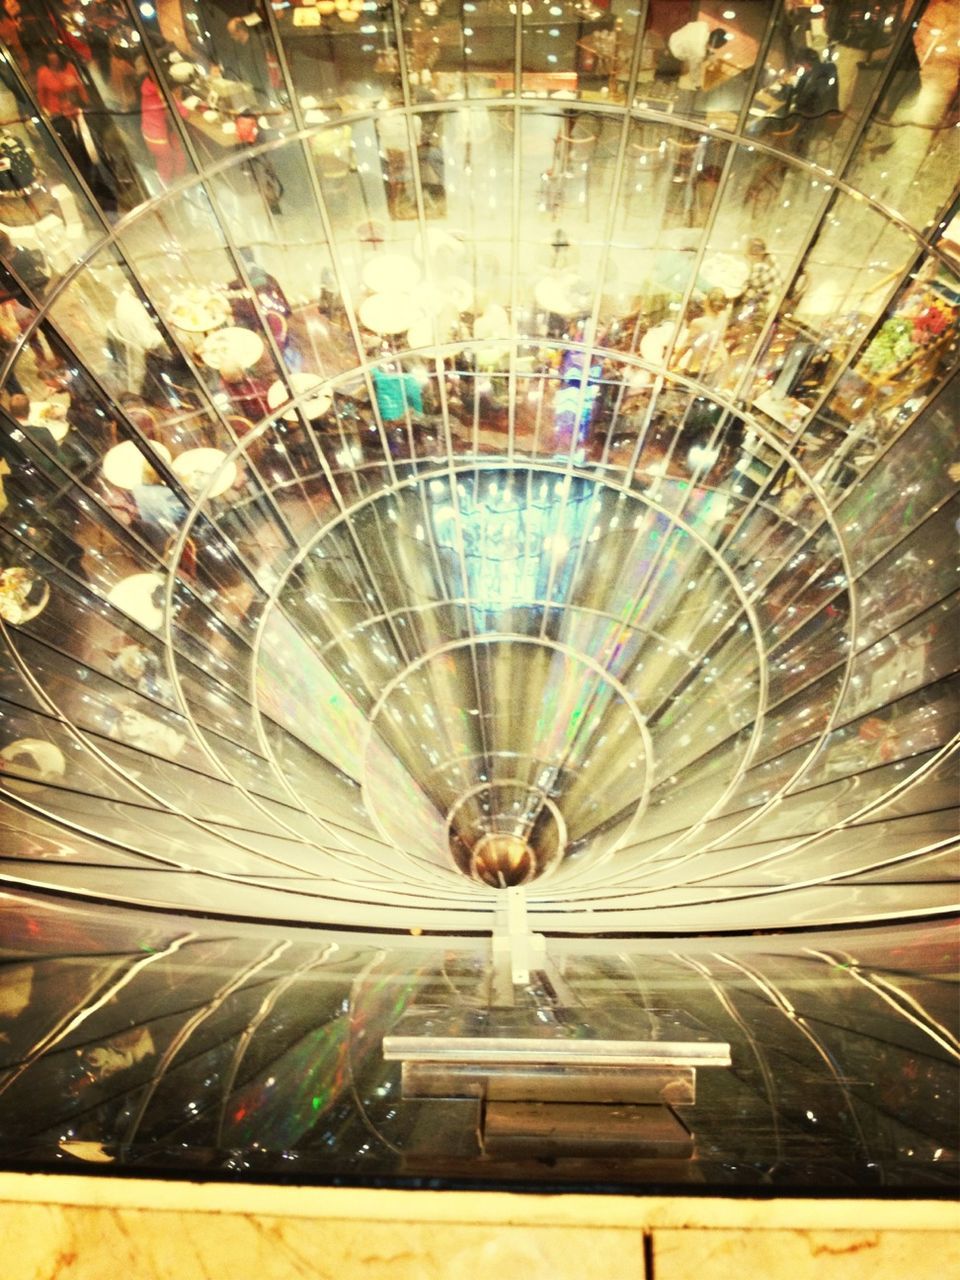 indoors, ceiling, illuminated, lighting equipment, pattern, full frame, backgrounds, low angle view, shopping mall, high angle view, hanging, glass - material, design, modern, no people, directly below, reflection, interior, transparent, electric light